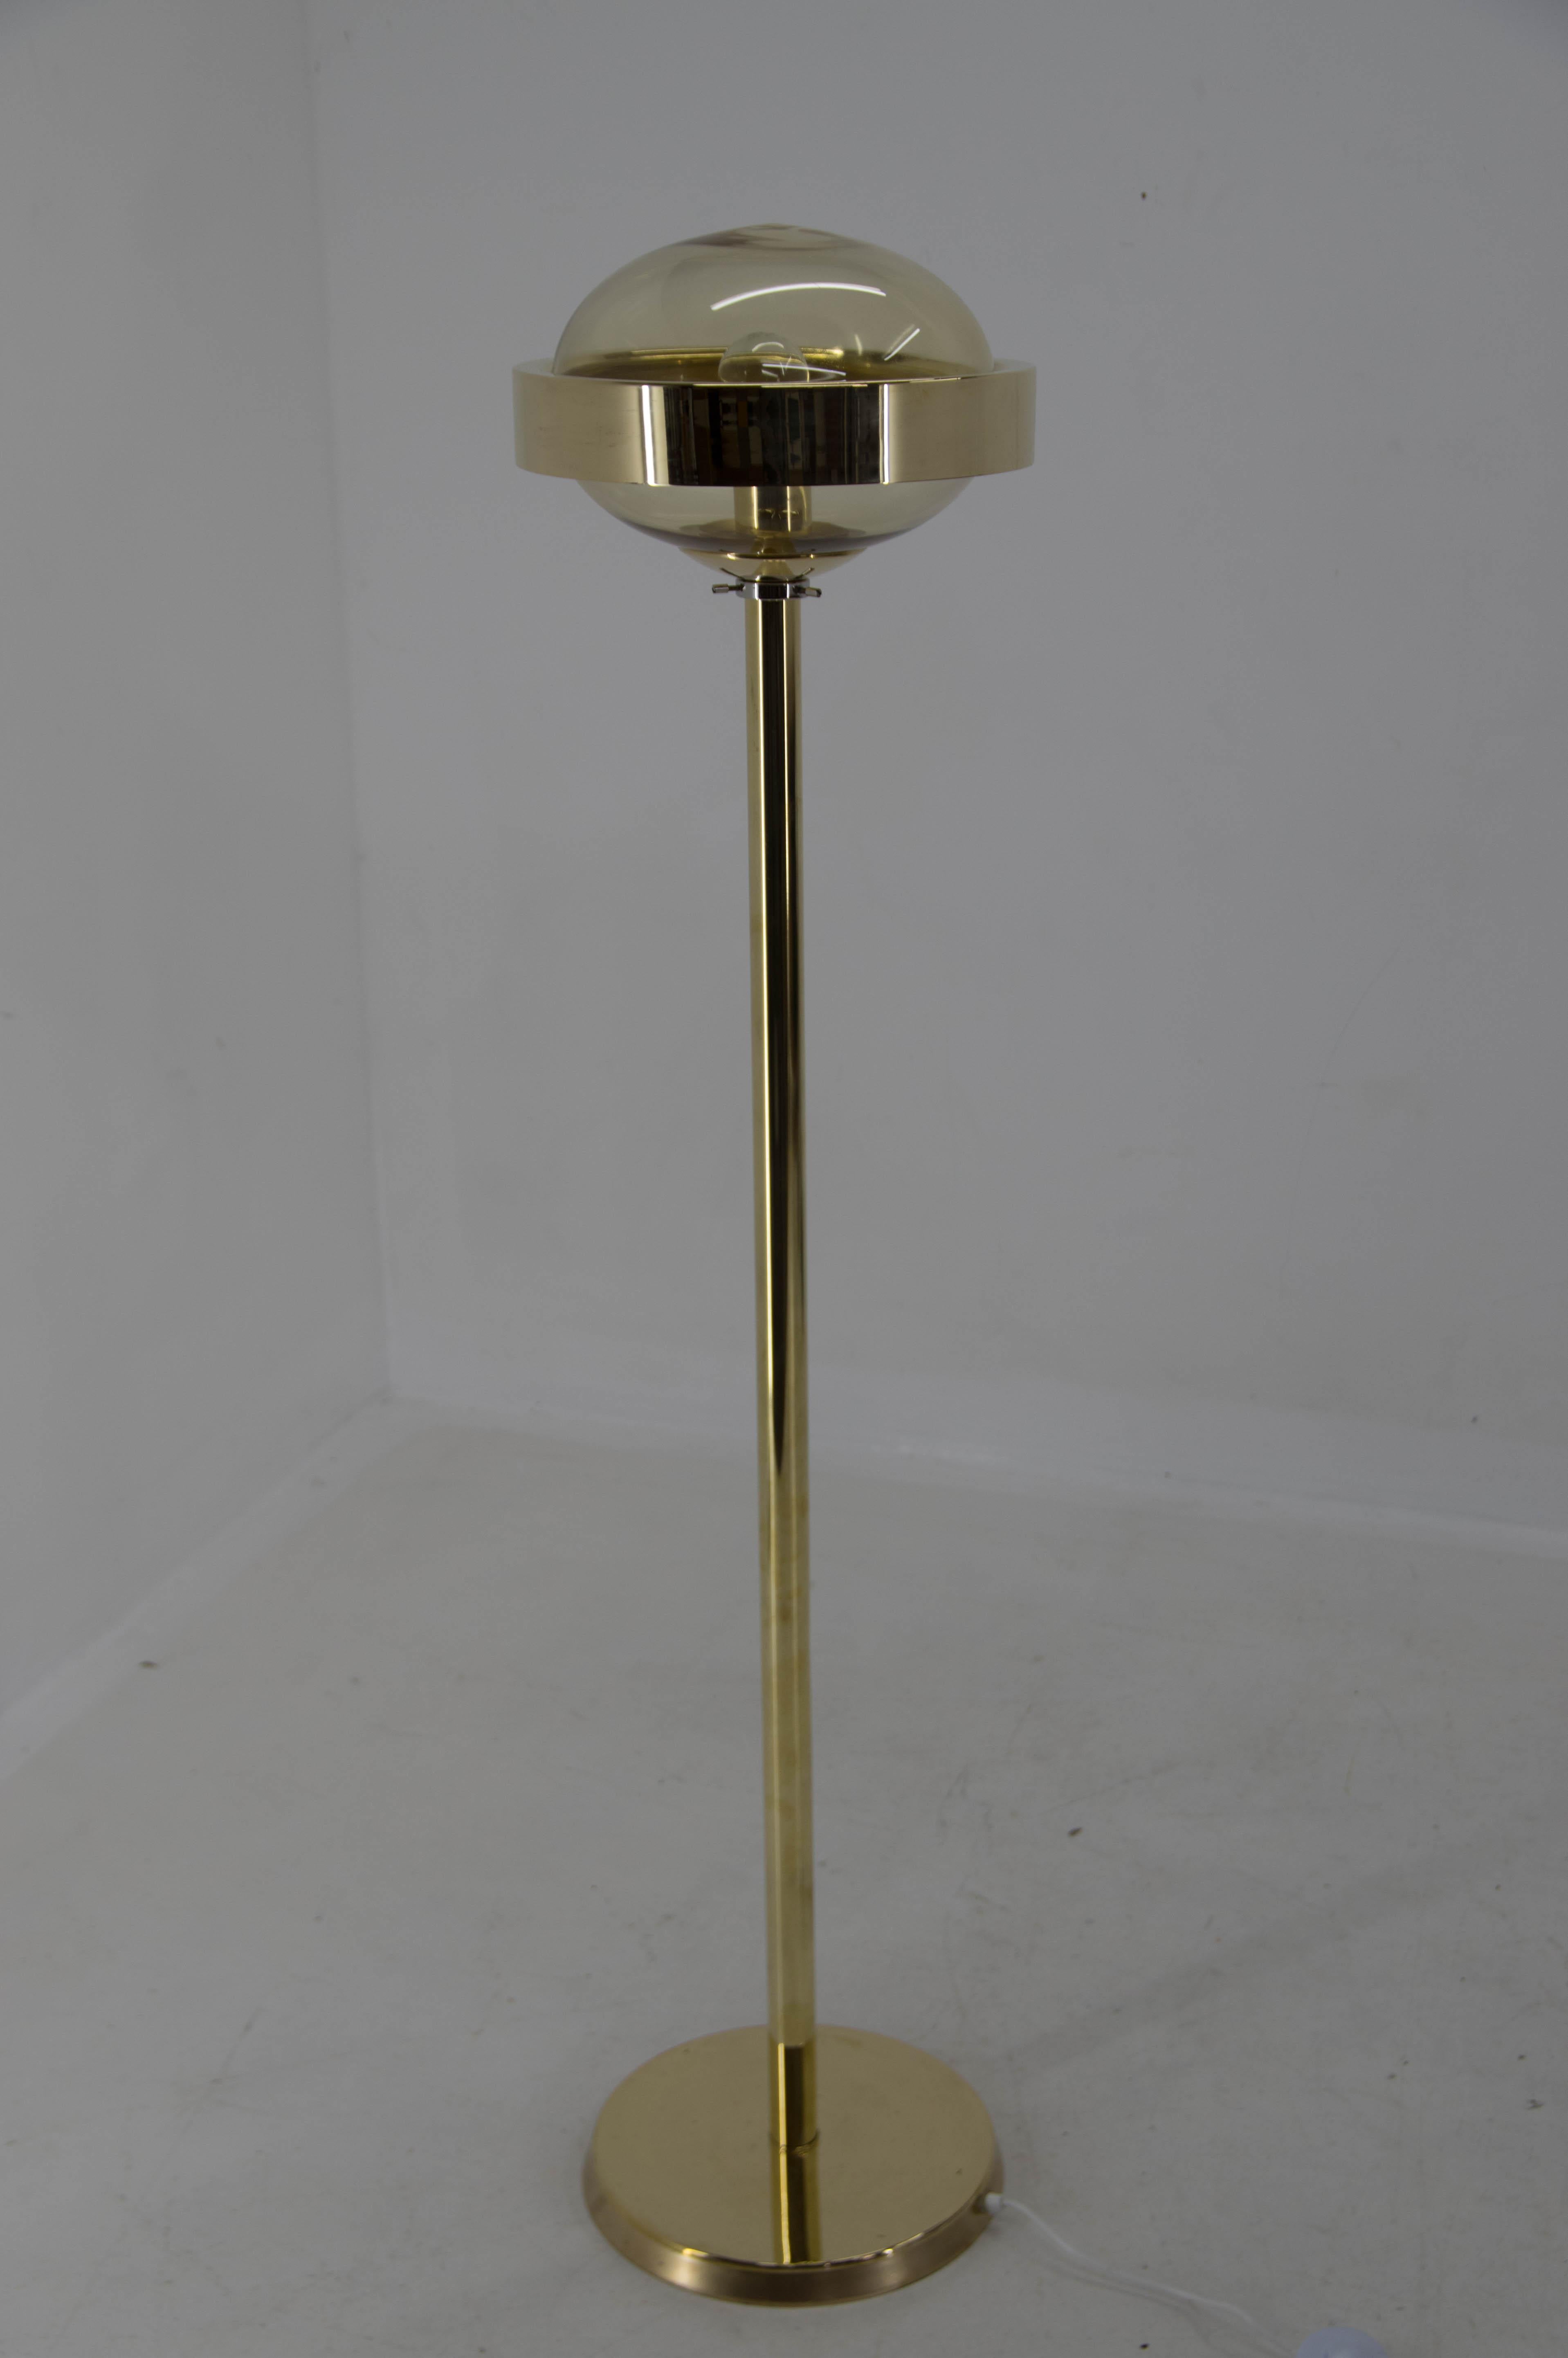 Floor lamp made of brass and smoke glass. 
Made by Preciosa, Kamenicky Senov in Czechoslovakia in 1970s
Restored: brass with minor age patina refinished
Rewired: 1x60W, E25-E27 bulb
US plug adapter included.
 